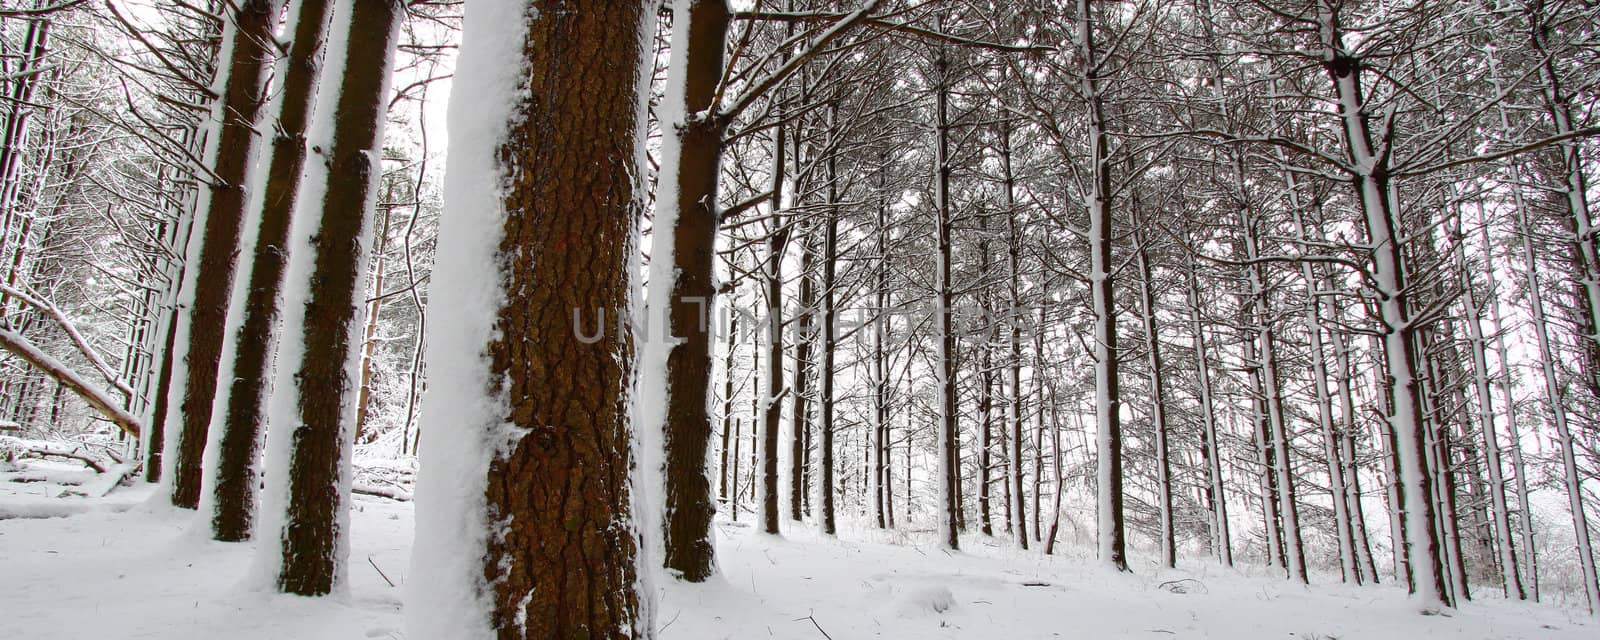 Snow covers a pine forest at Rock Cut State Park in northern Illinois.